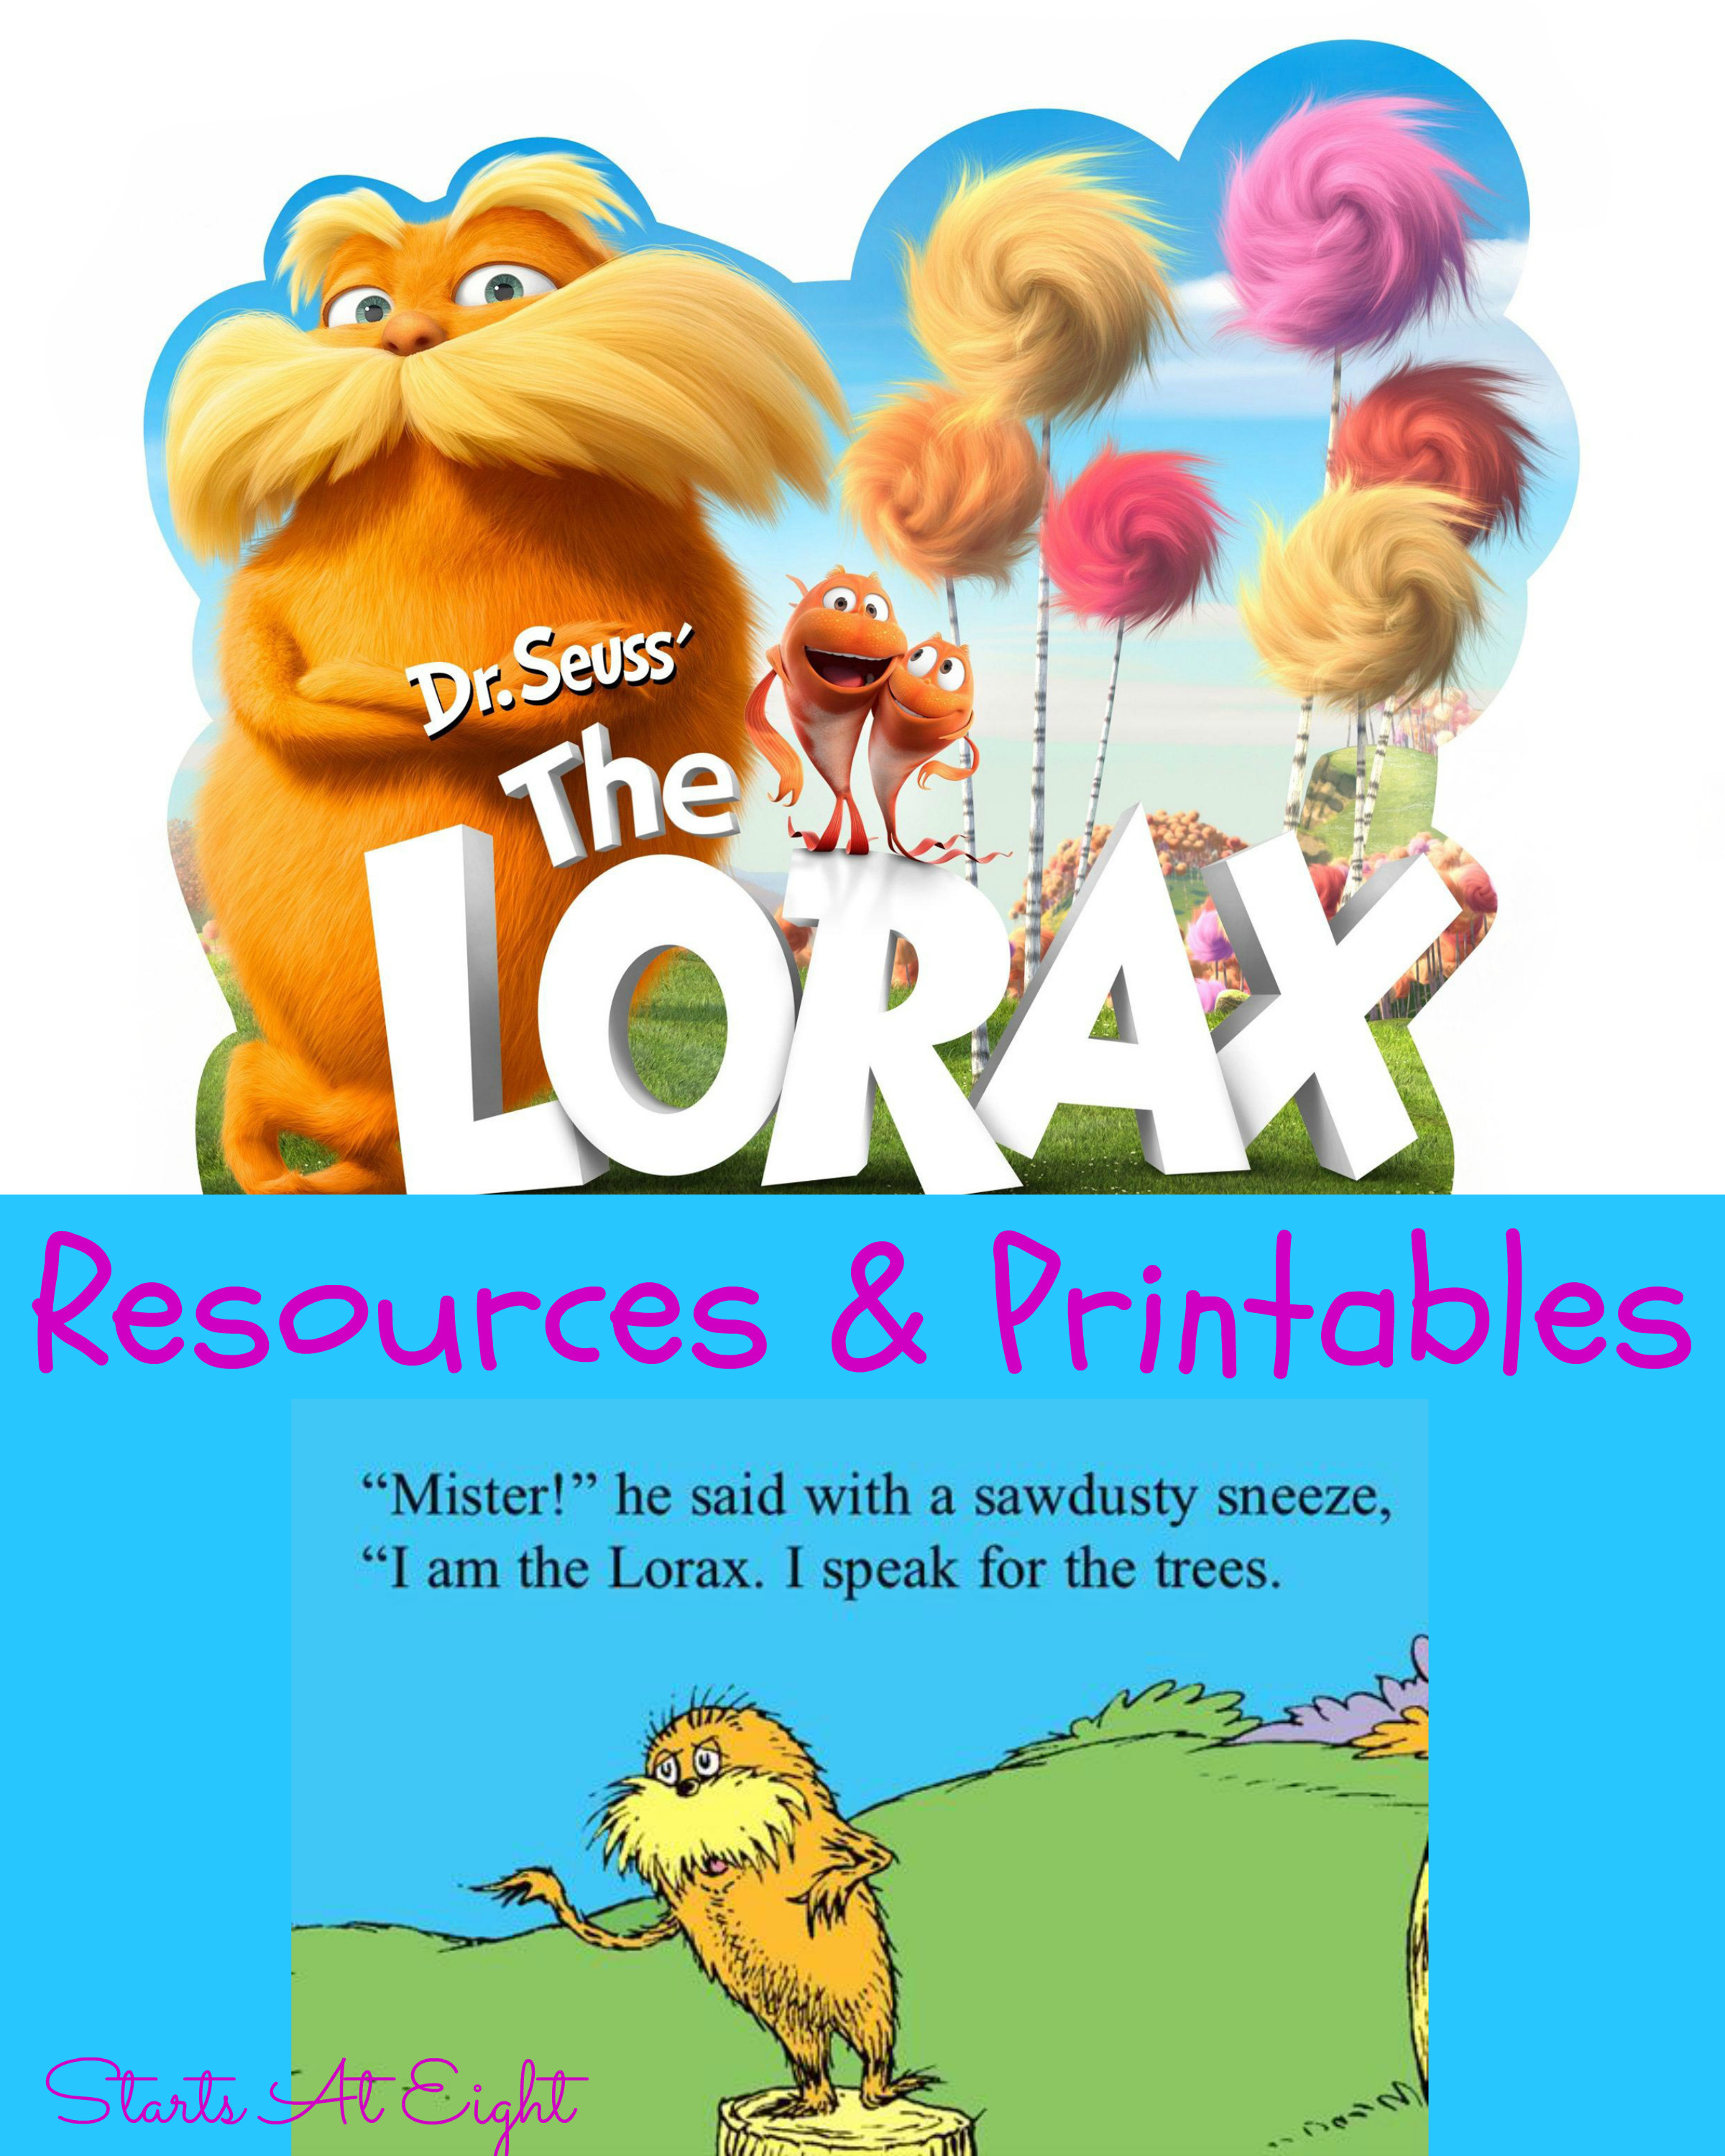 Dr Seuss's The Lorax Resources  Printables  Startsateight